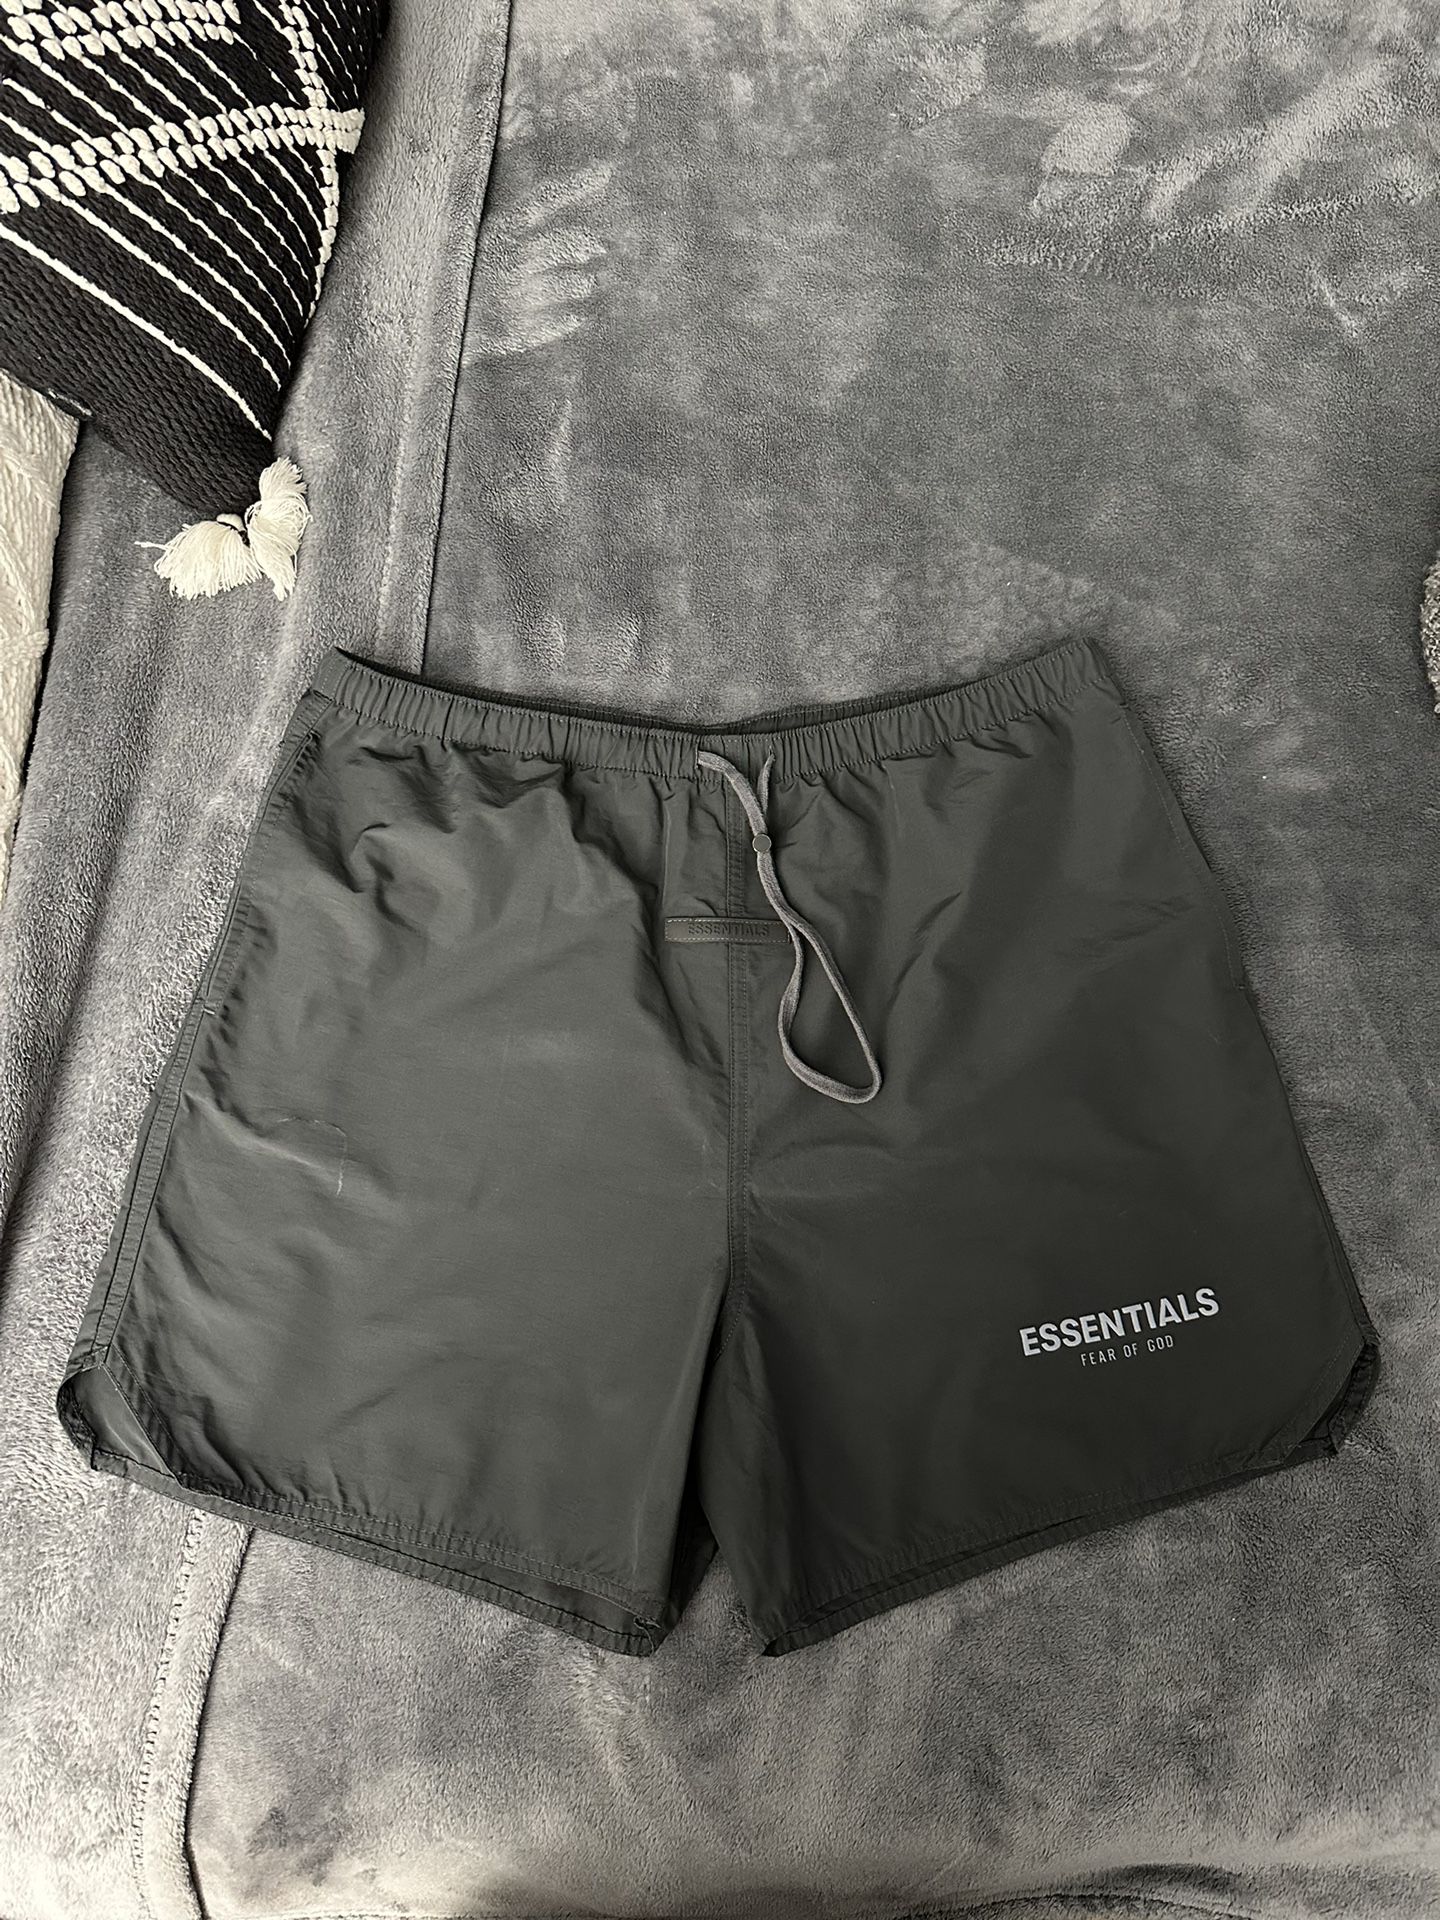 Fear of God Essentials Volley Short Size Large for Sale in Glendale